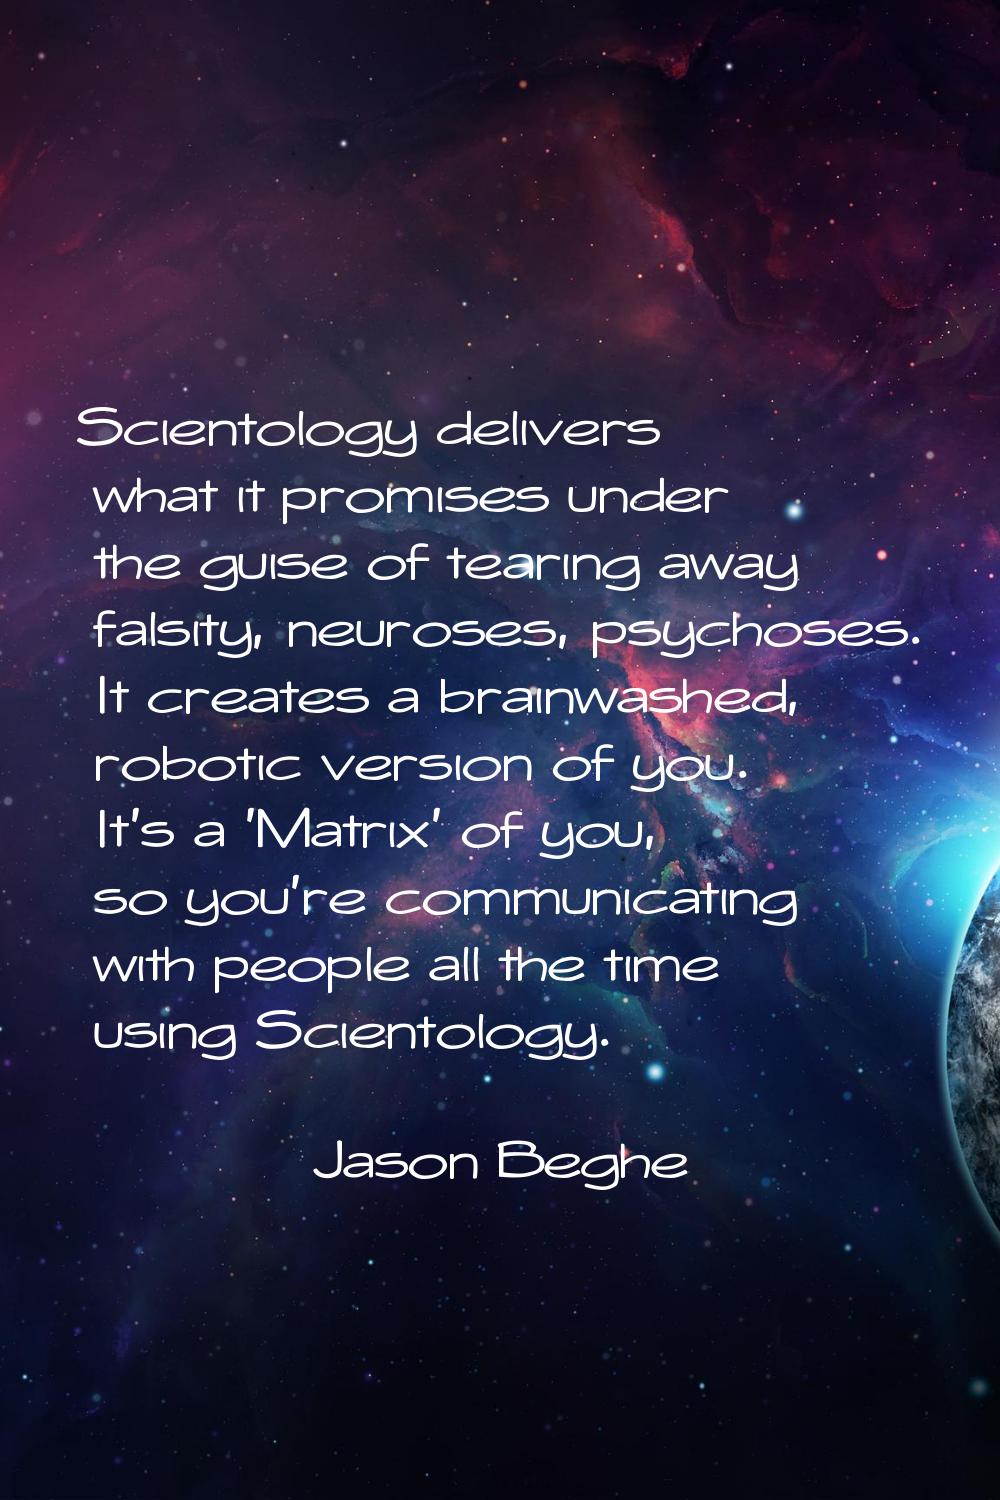 Scientology delivers what it promises under the guise of tearing away falsity, neuroses, psychoses.